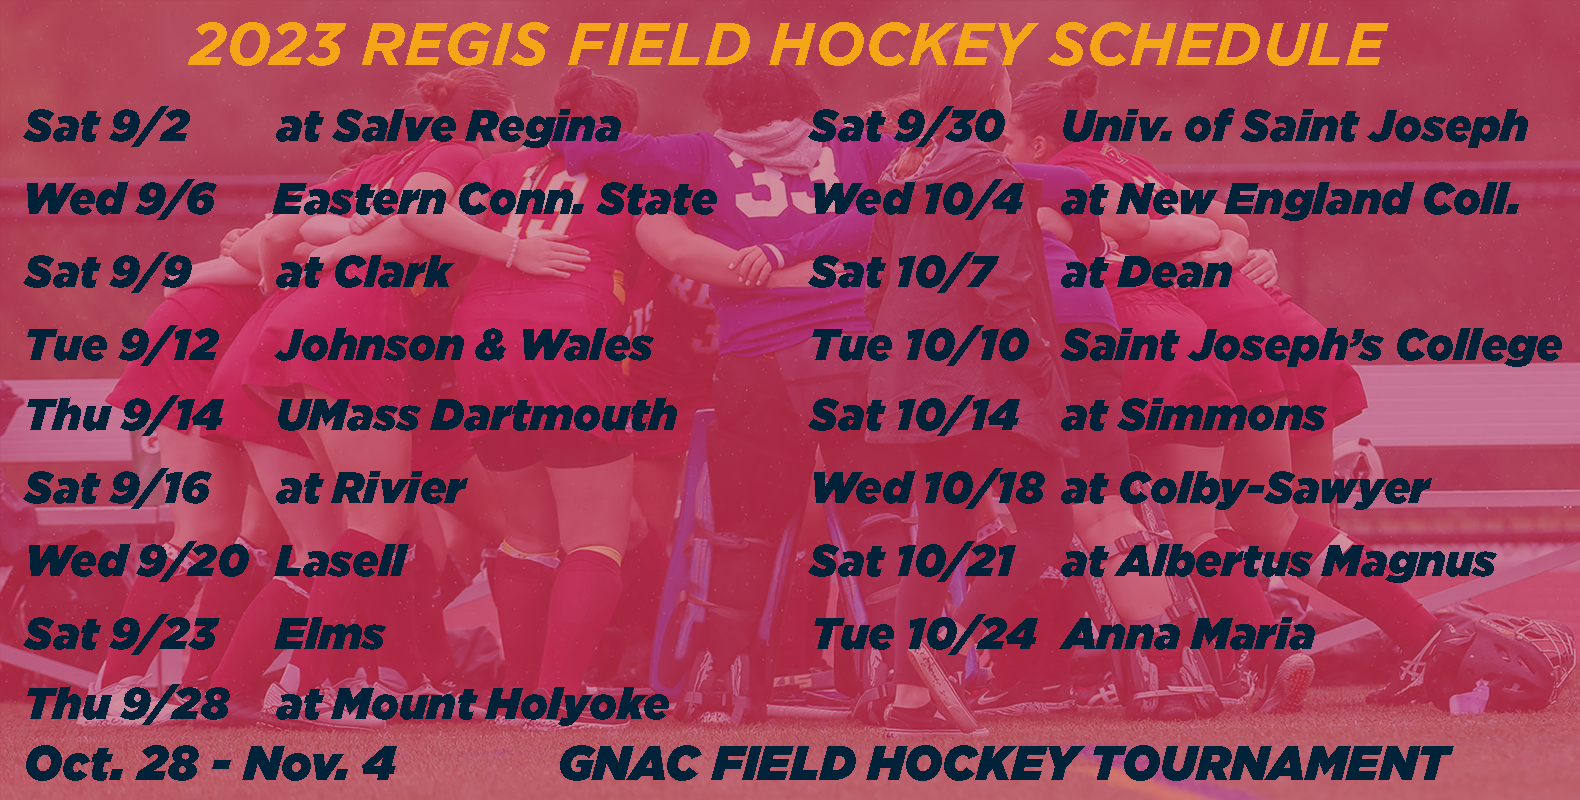 Regis Field Hockey Aiming for Success as 2023 Schedule Finalizes